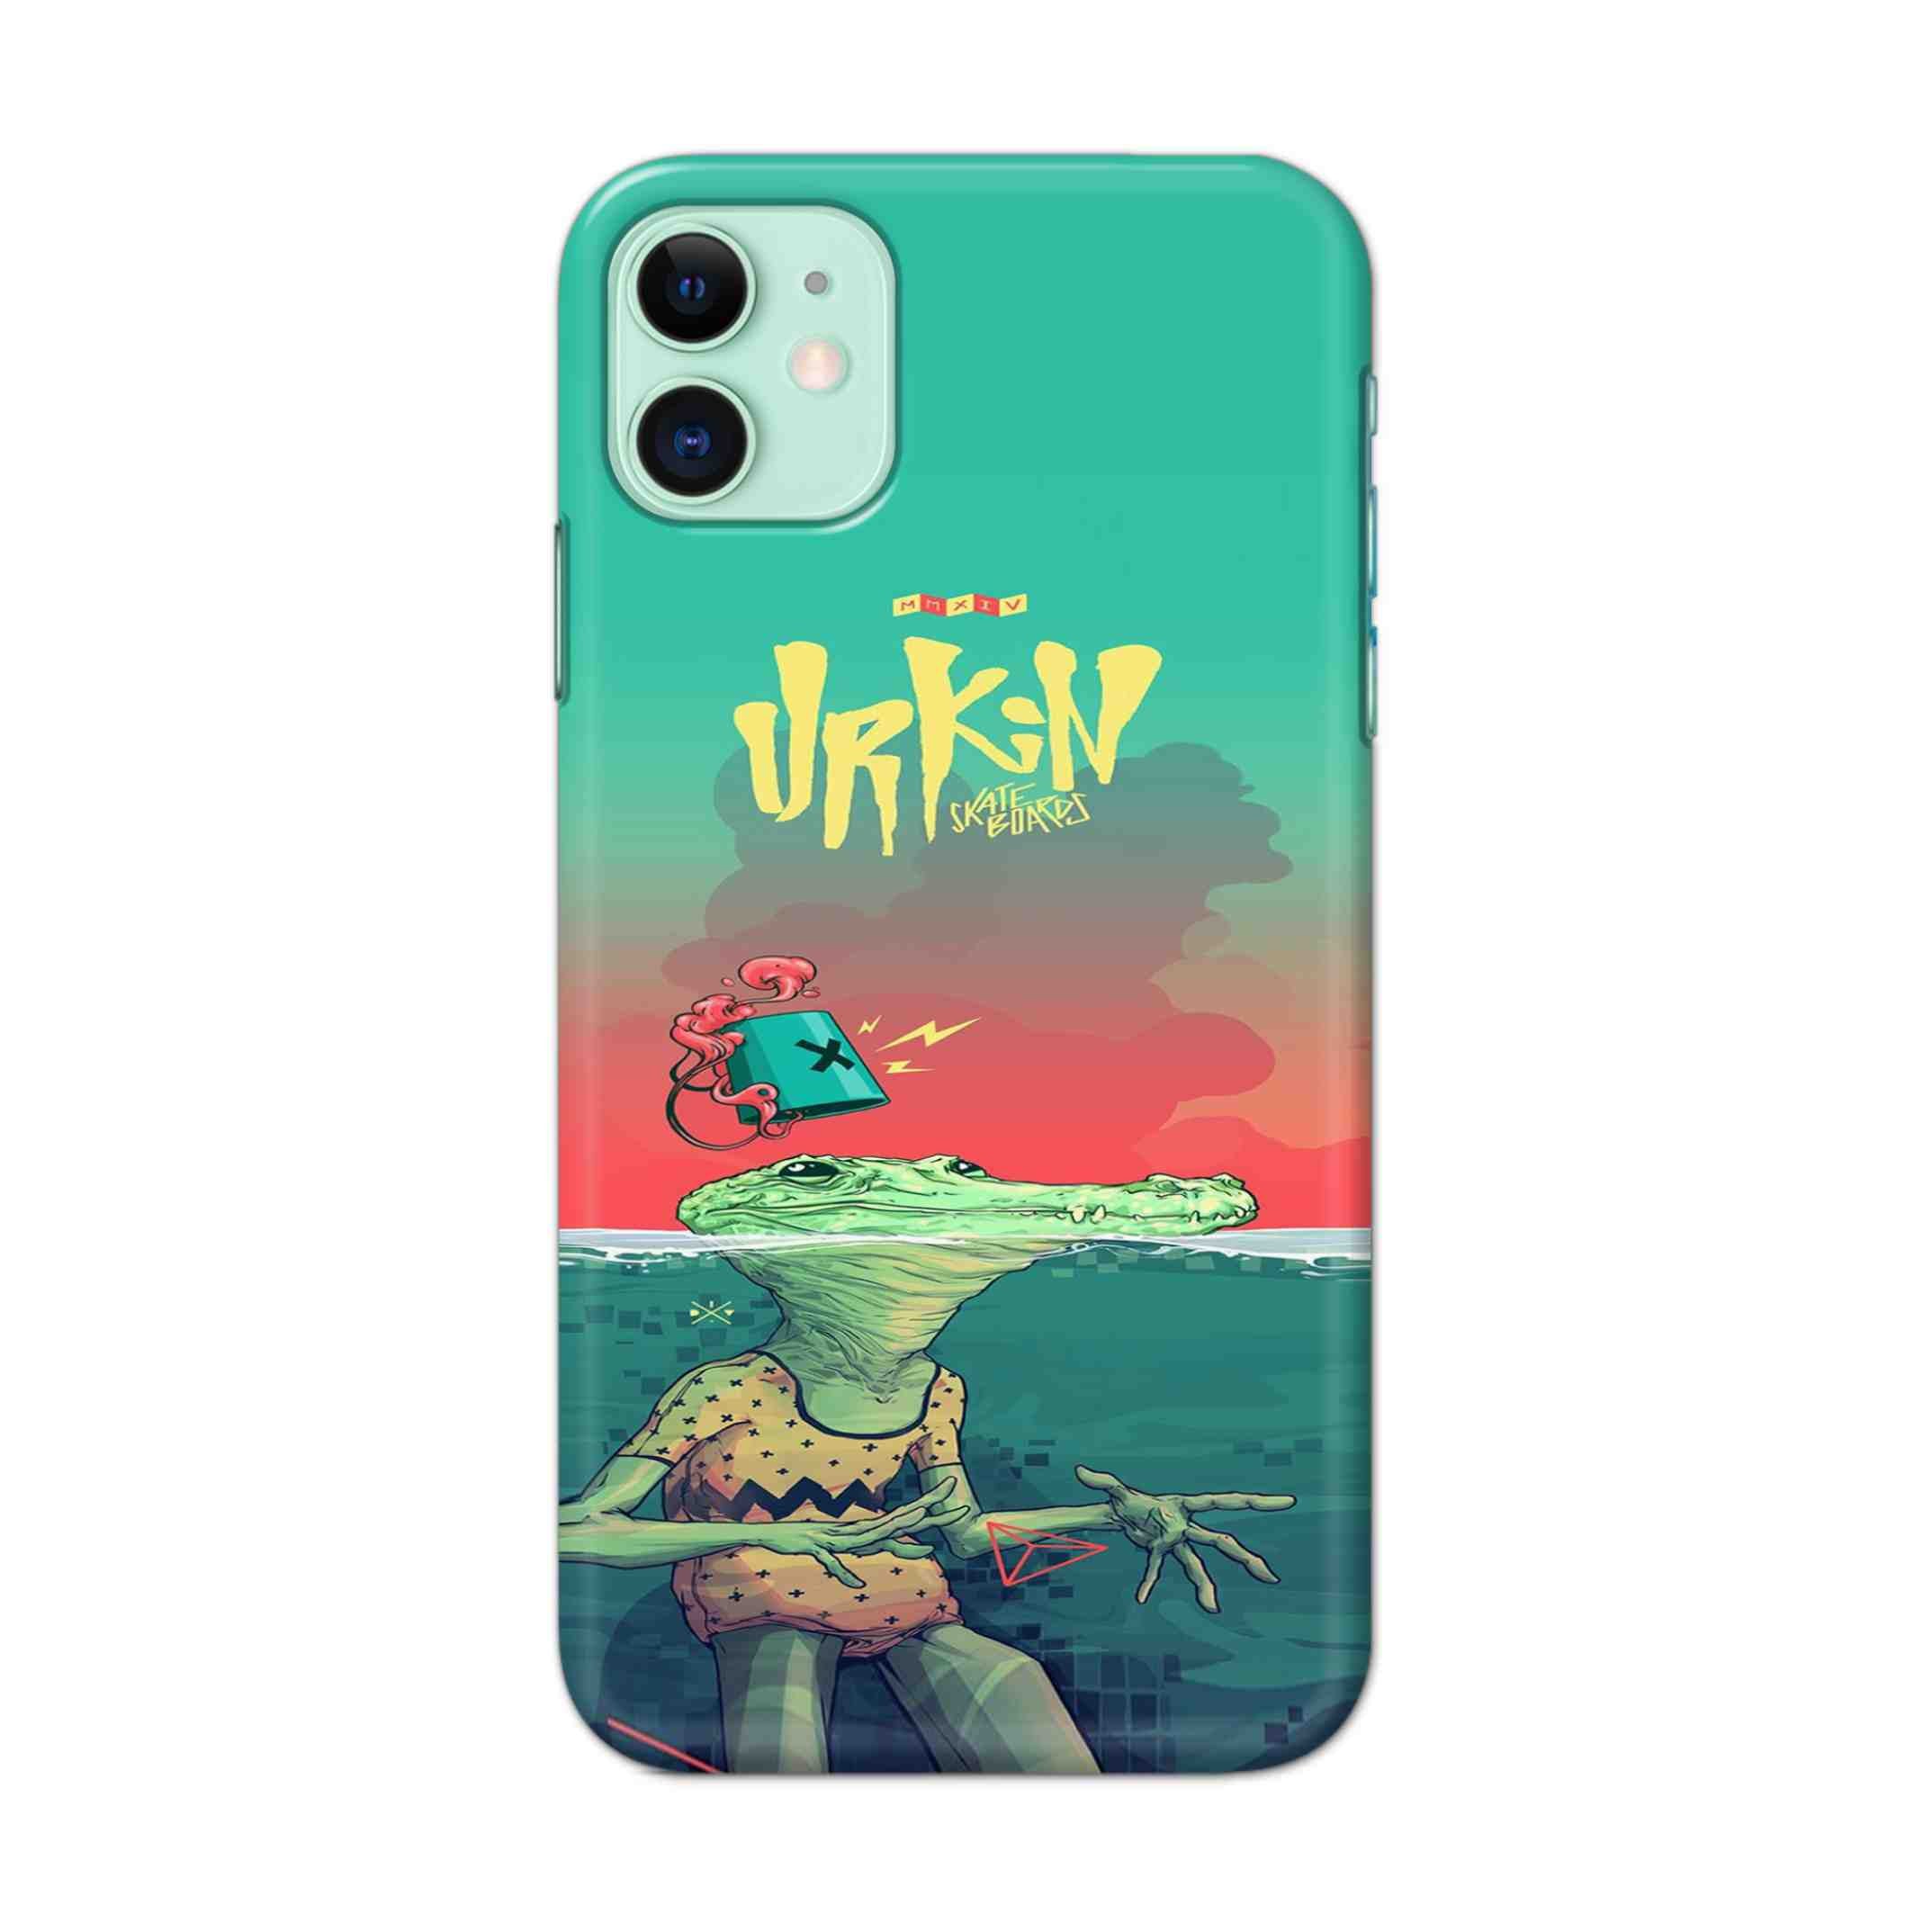 Buy Urkin Hard Back Mobile Phone Case/Cover For iPhone 11 Online